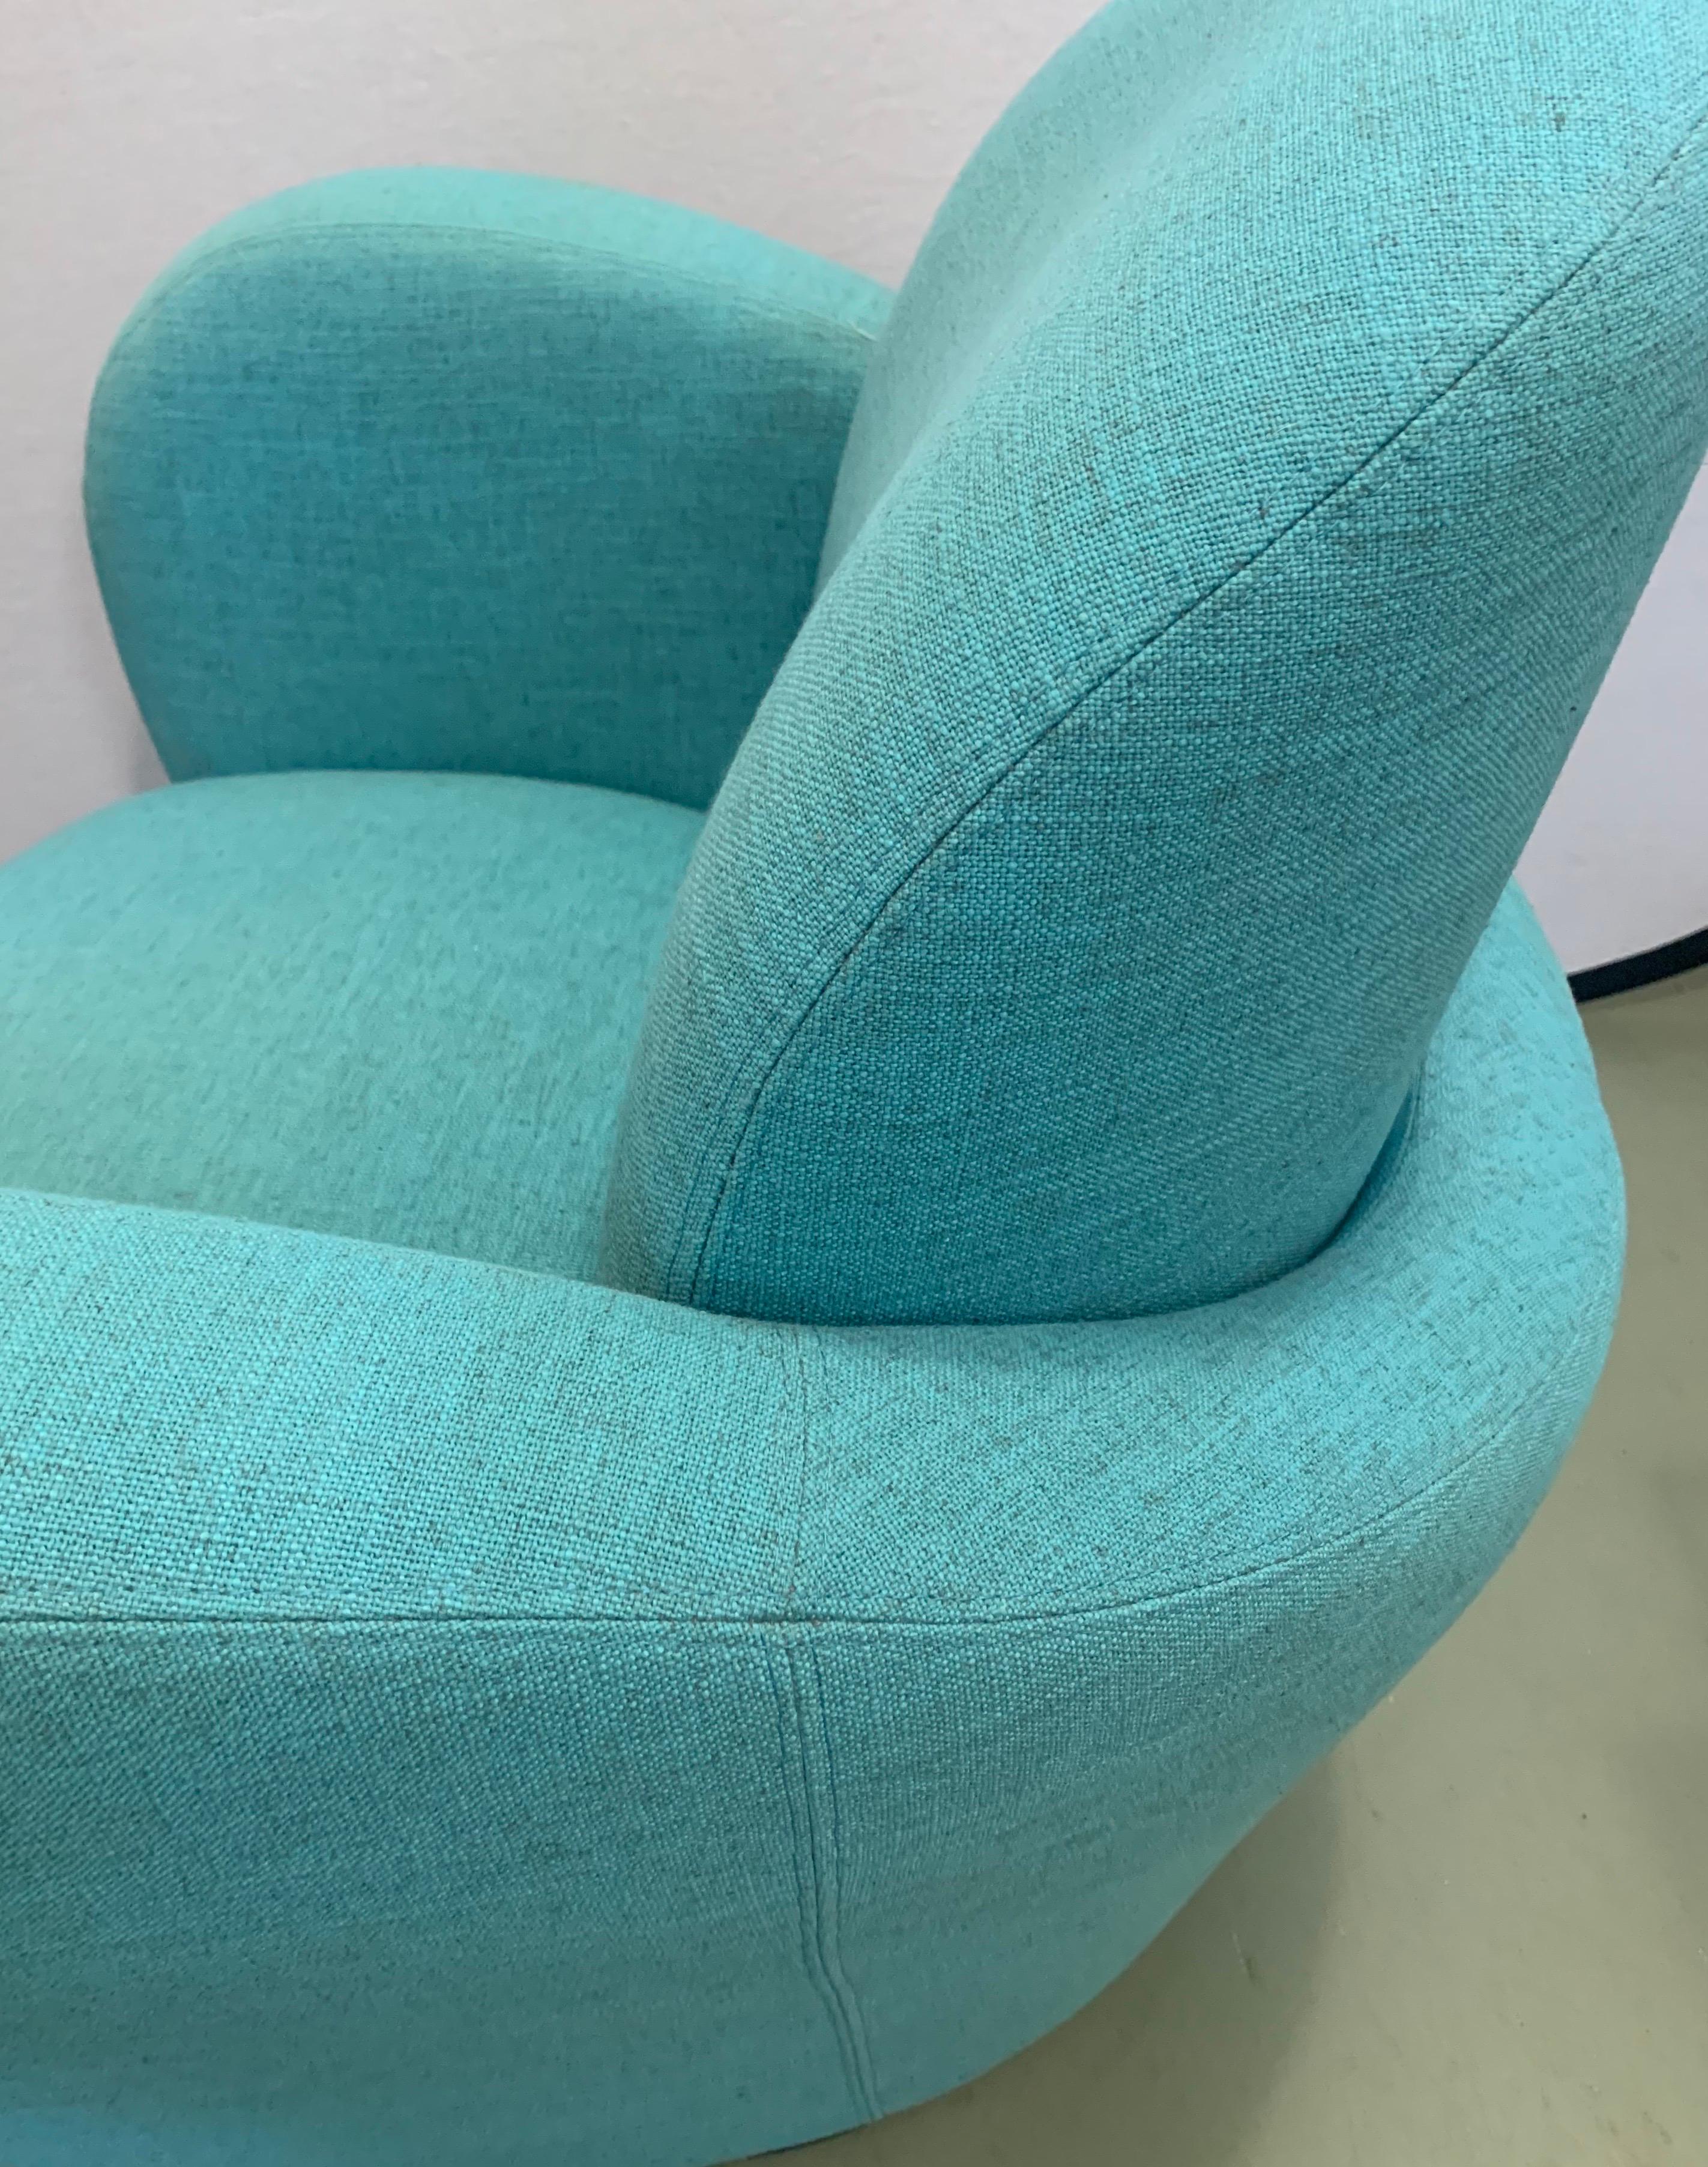 American Mid-Century Modern Turquoise Upholstered Swivel Chair Weiman